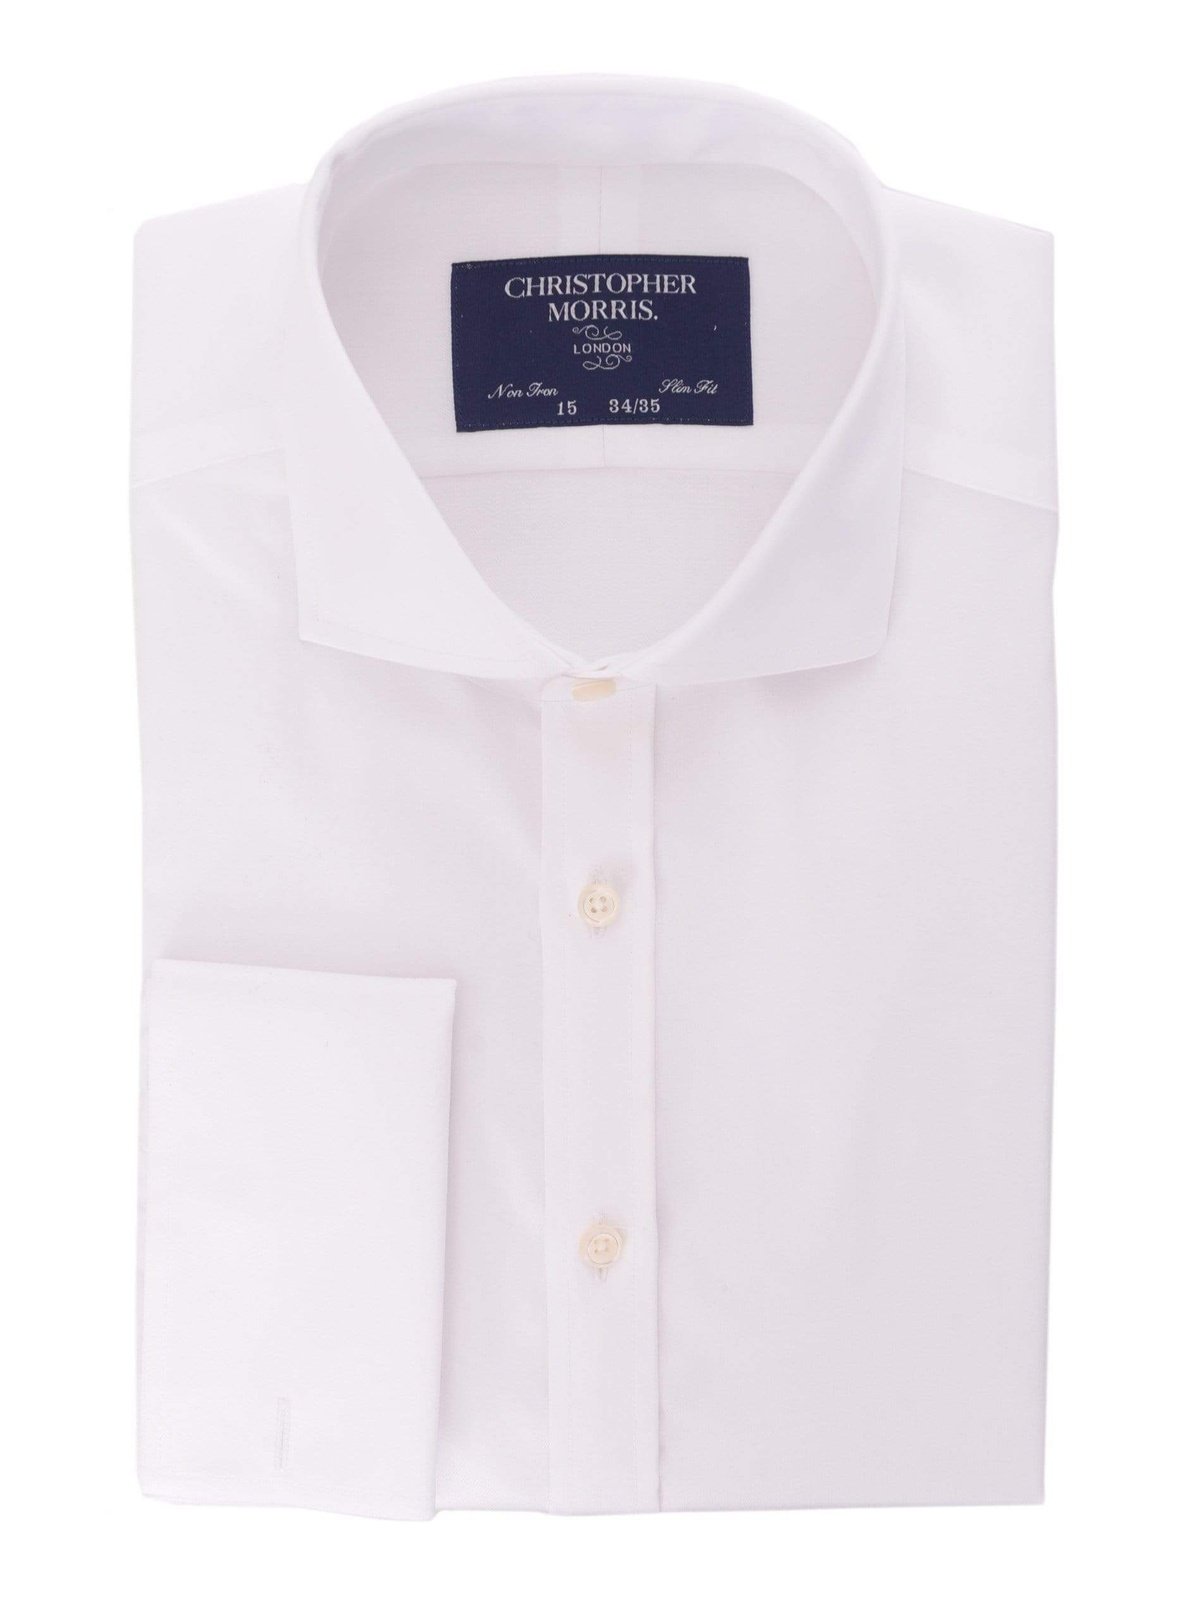 Christopher Morris Bestselling Items 16 34/35 Christopher Morris Men&#39;s 100% Cotton Non-Iron White French Cuff Dress Shirt